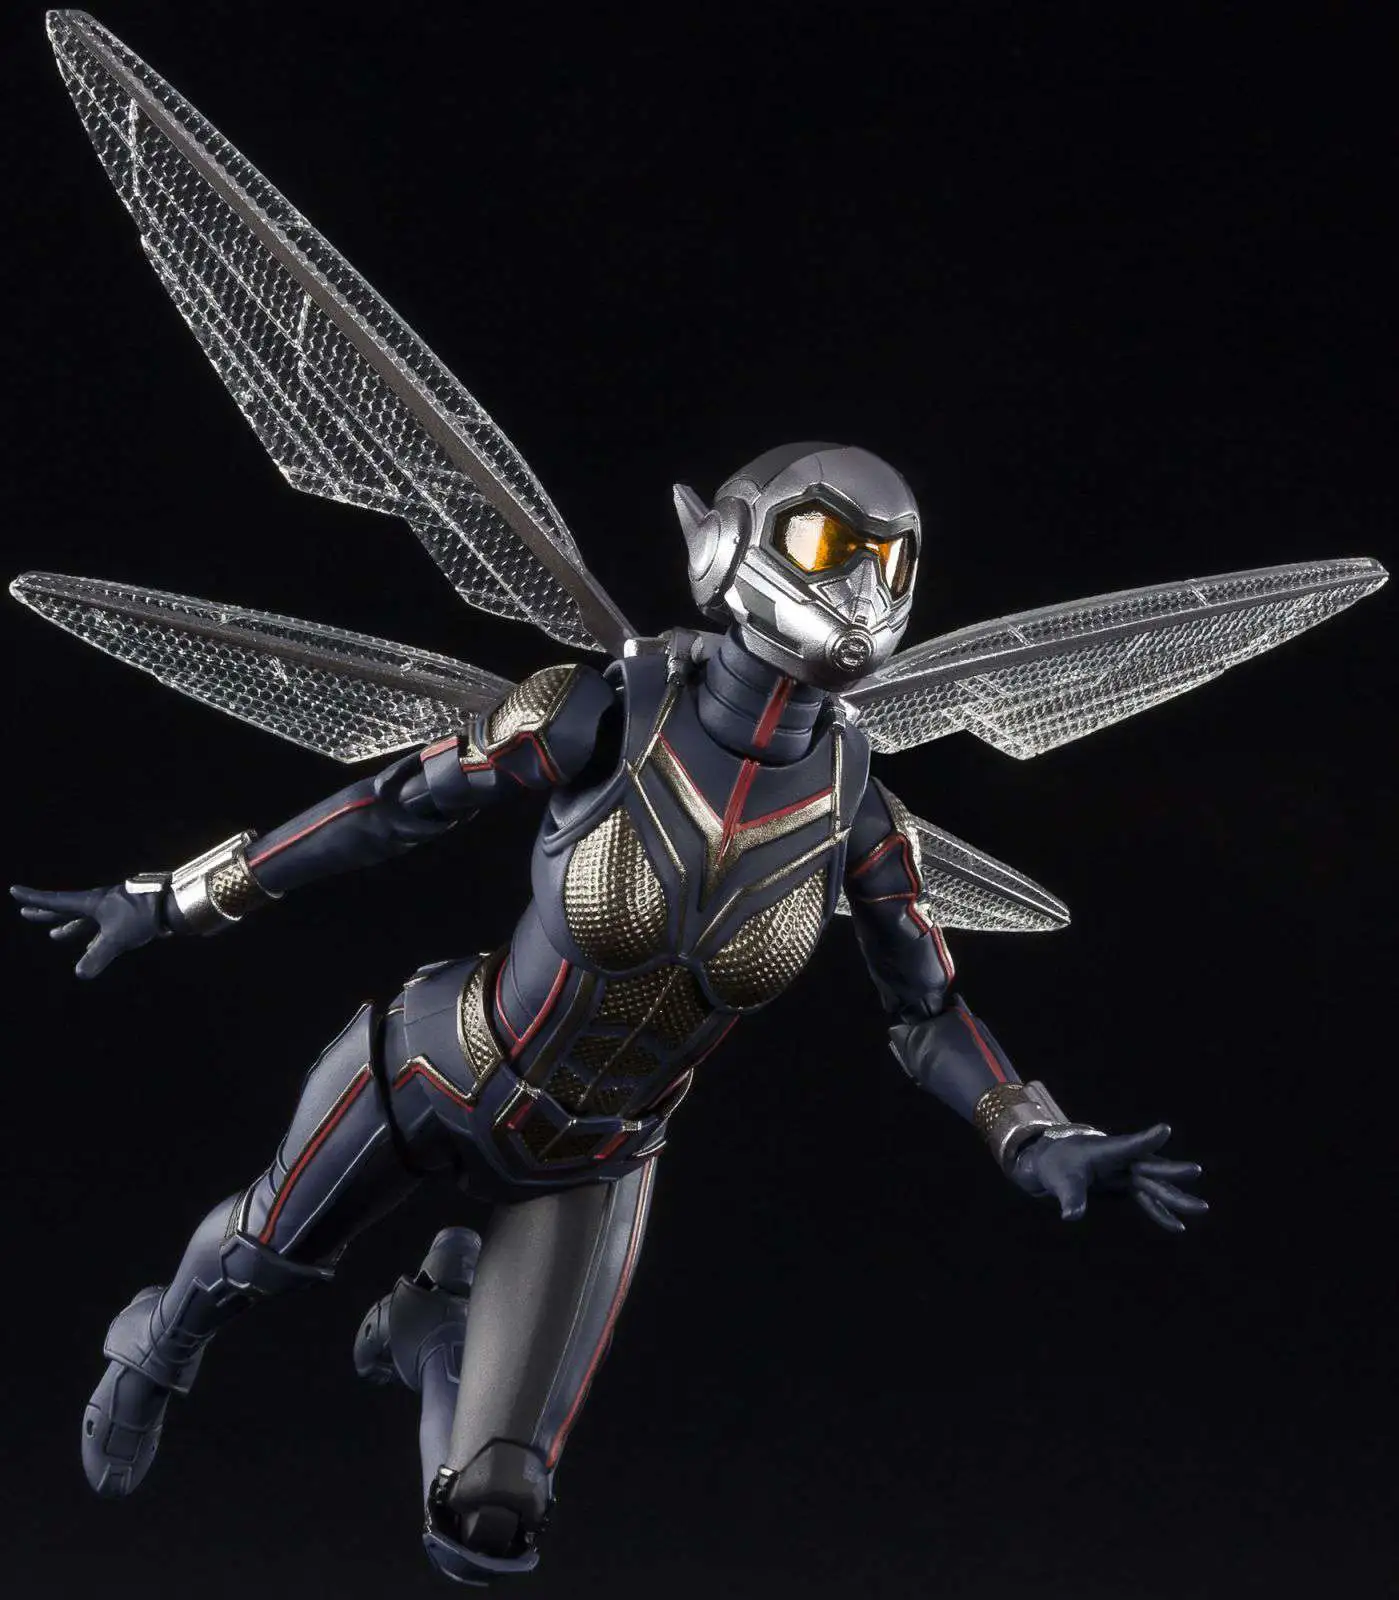 BANDAI S.H.Figuarts Marvel Avengers WASP ant-man and the wasp action figure 